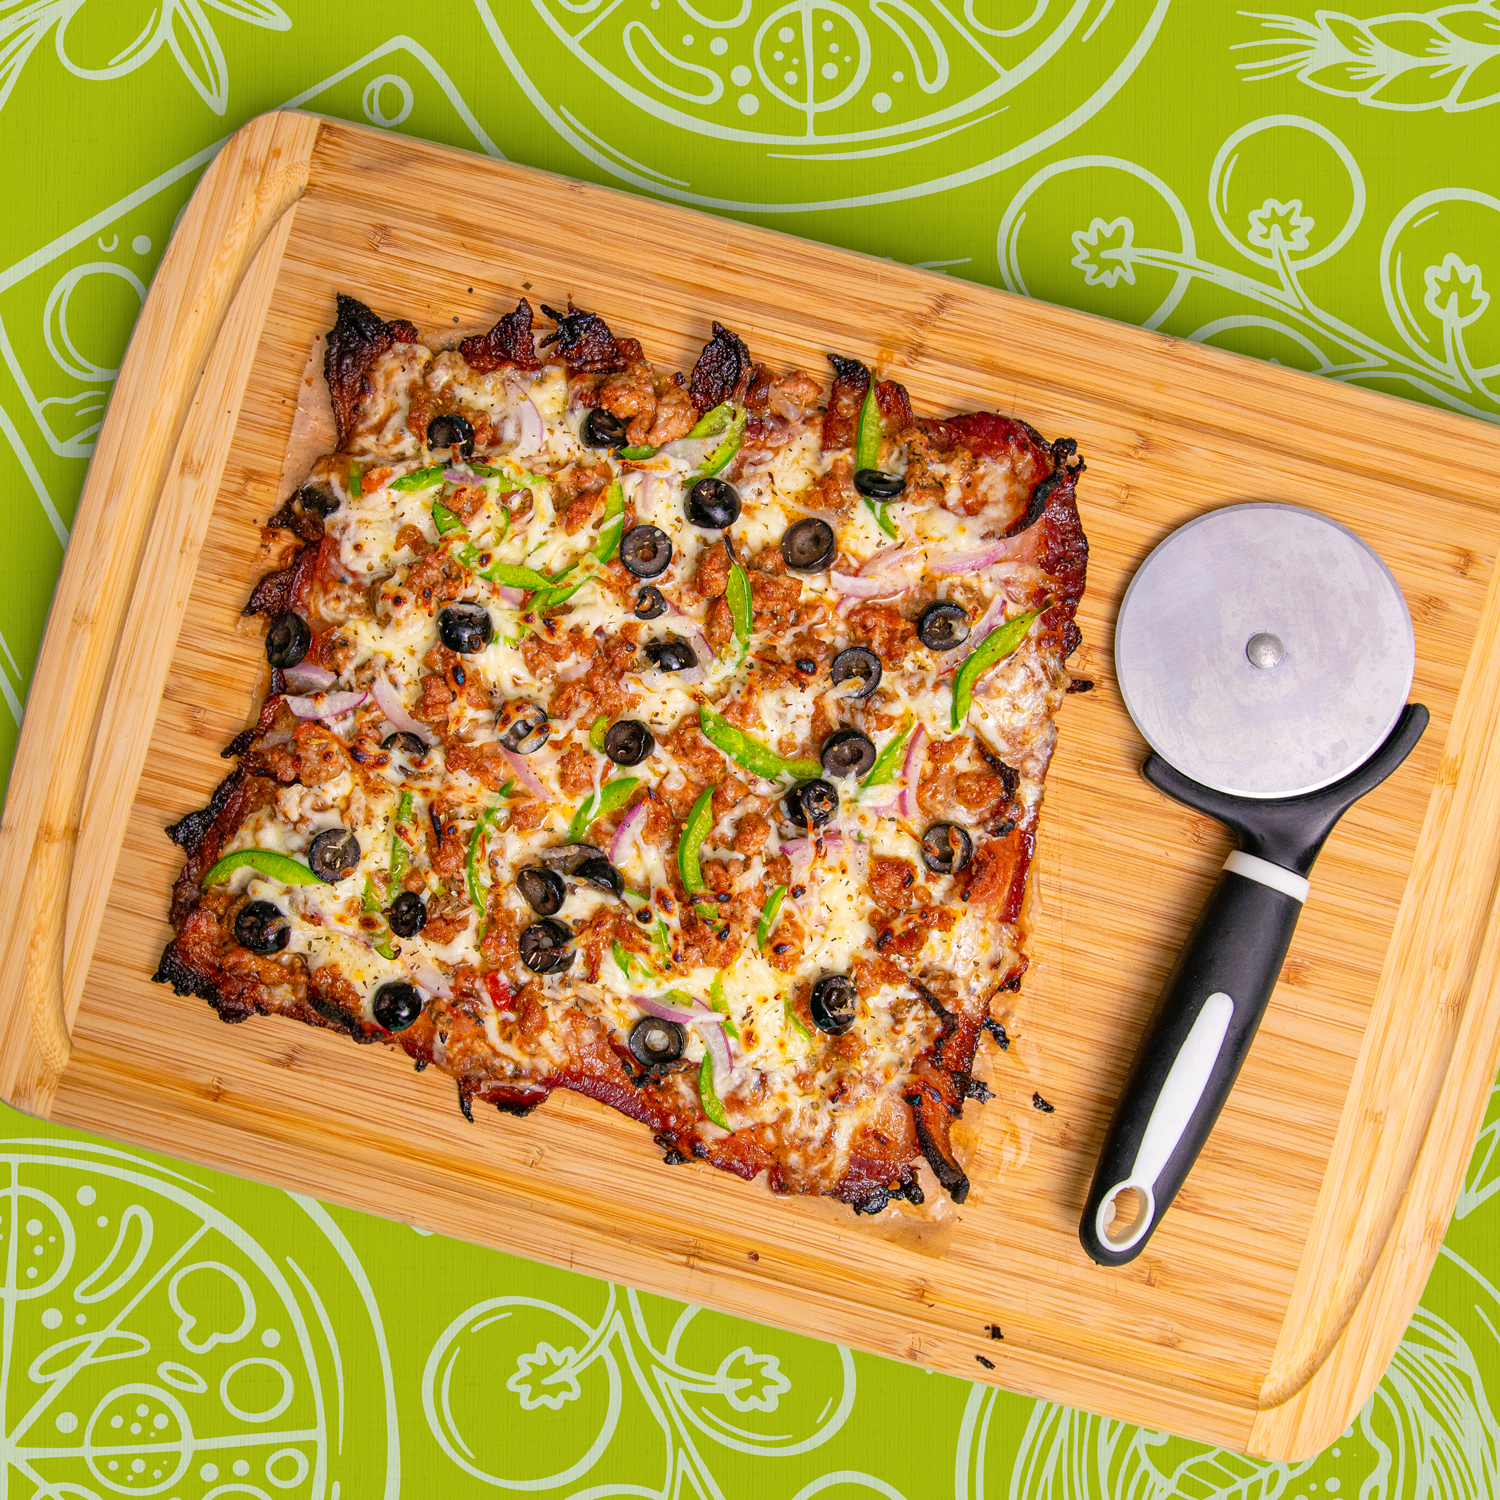 A savory flatbread pizza with cheese, fresh olives, and crunchy green peppers